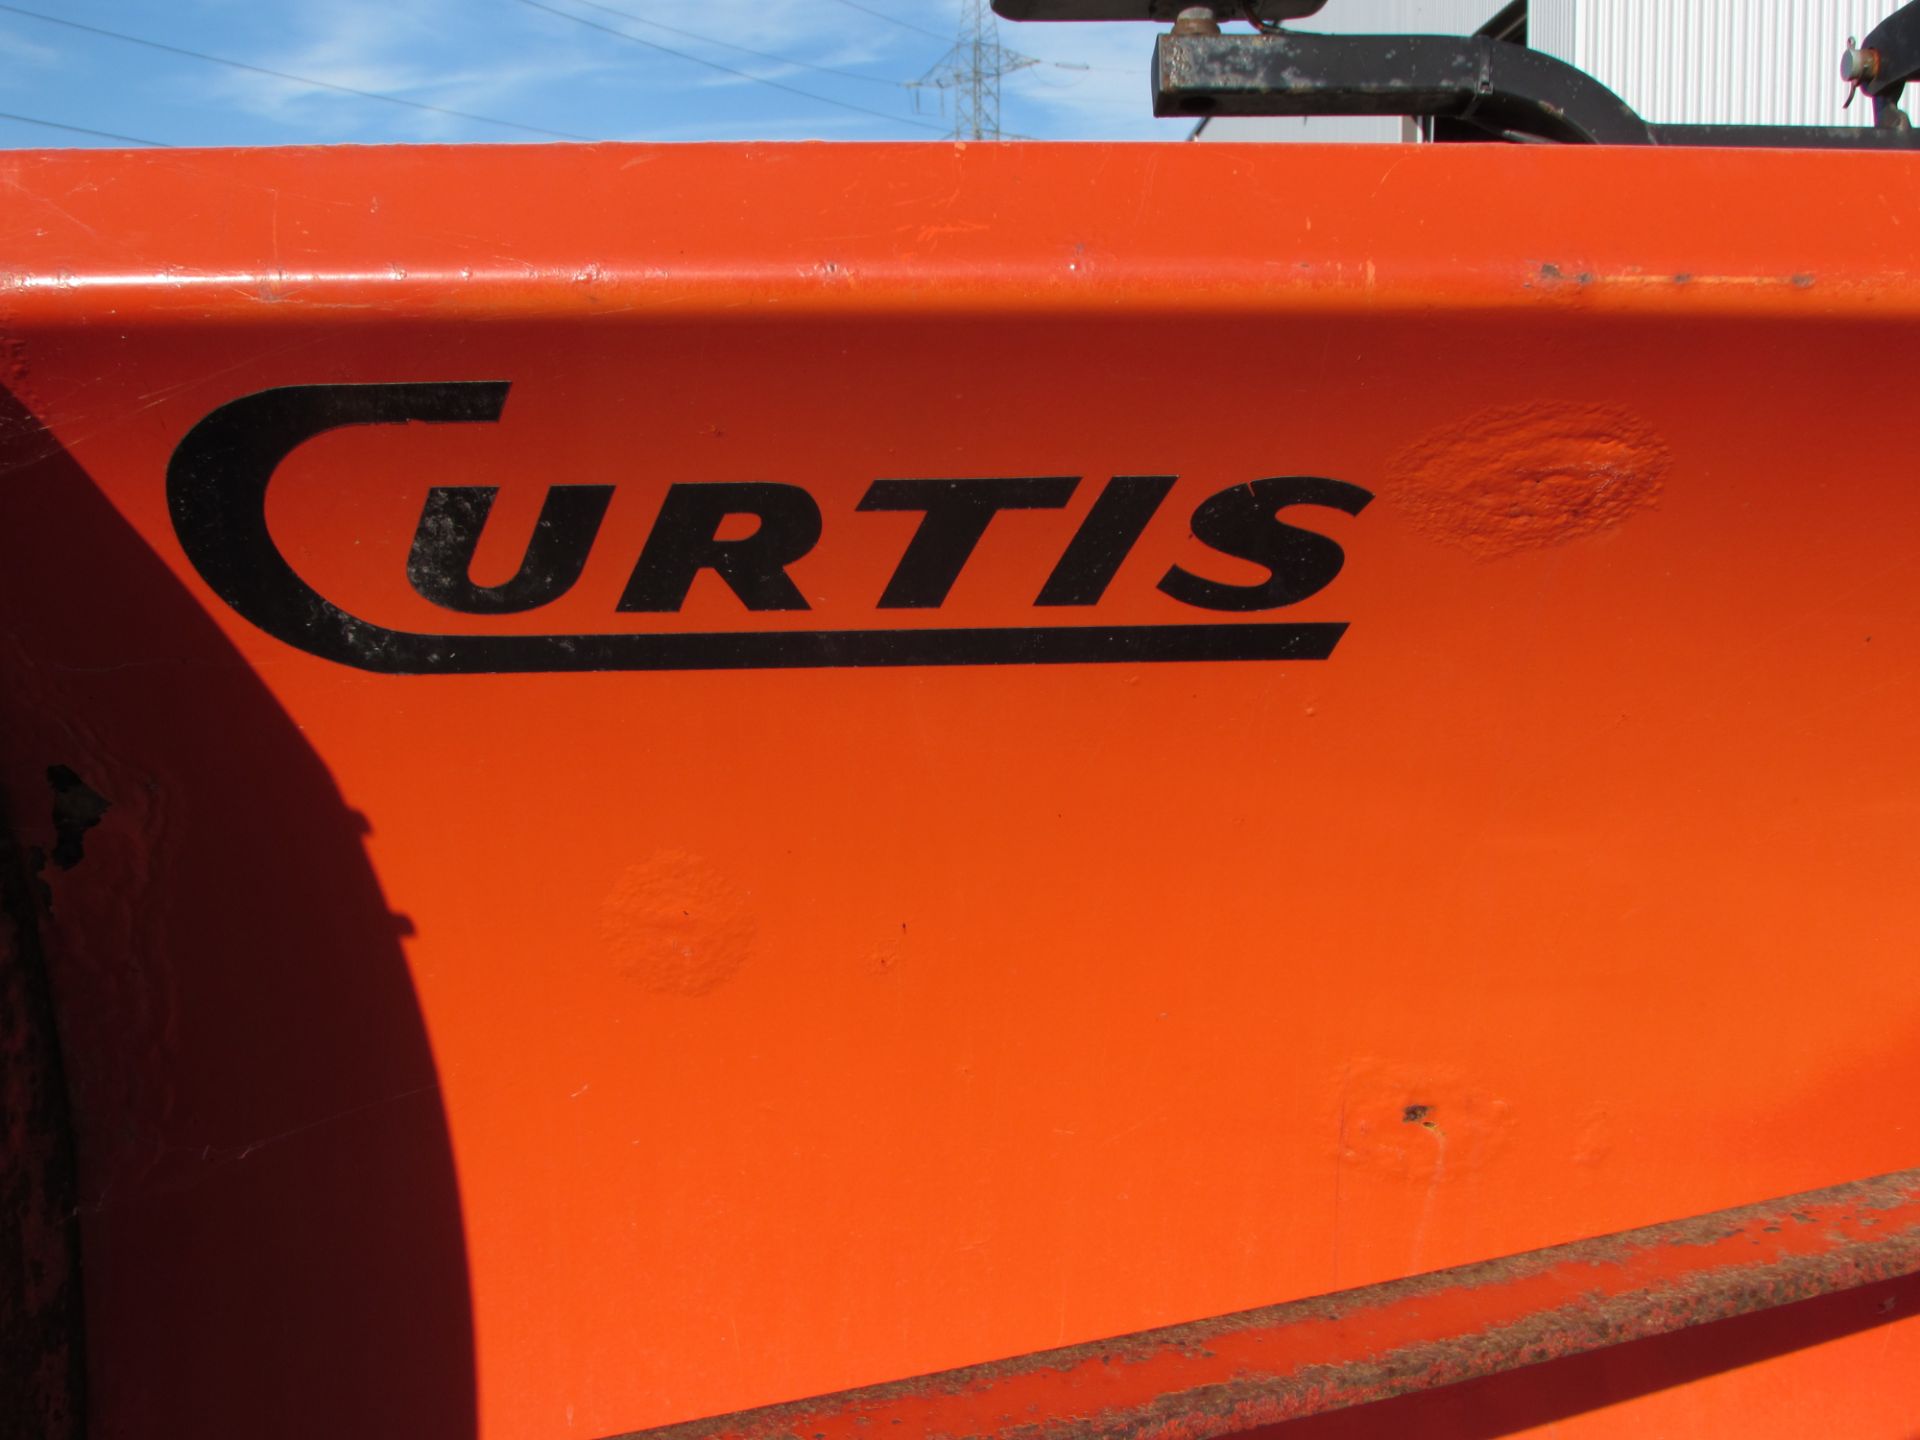 CURTIS 7-1/2' TRUCK MOUNT SNOW PLOW S/N: - 511856 - Image 2 of 5